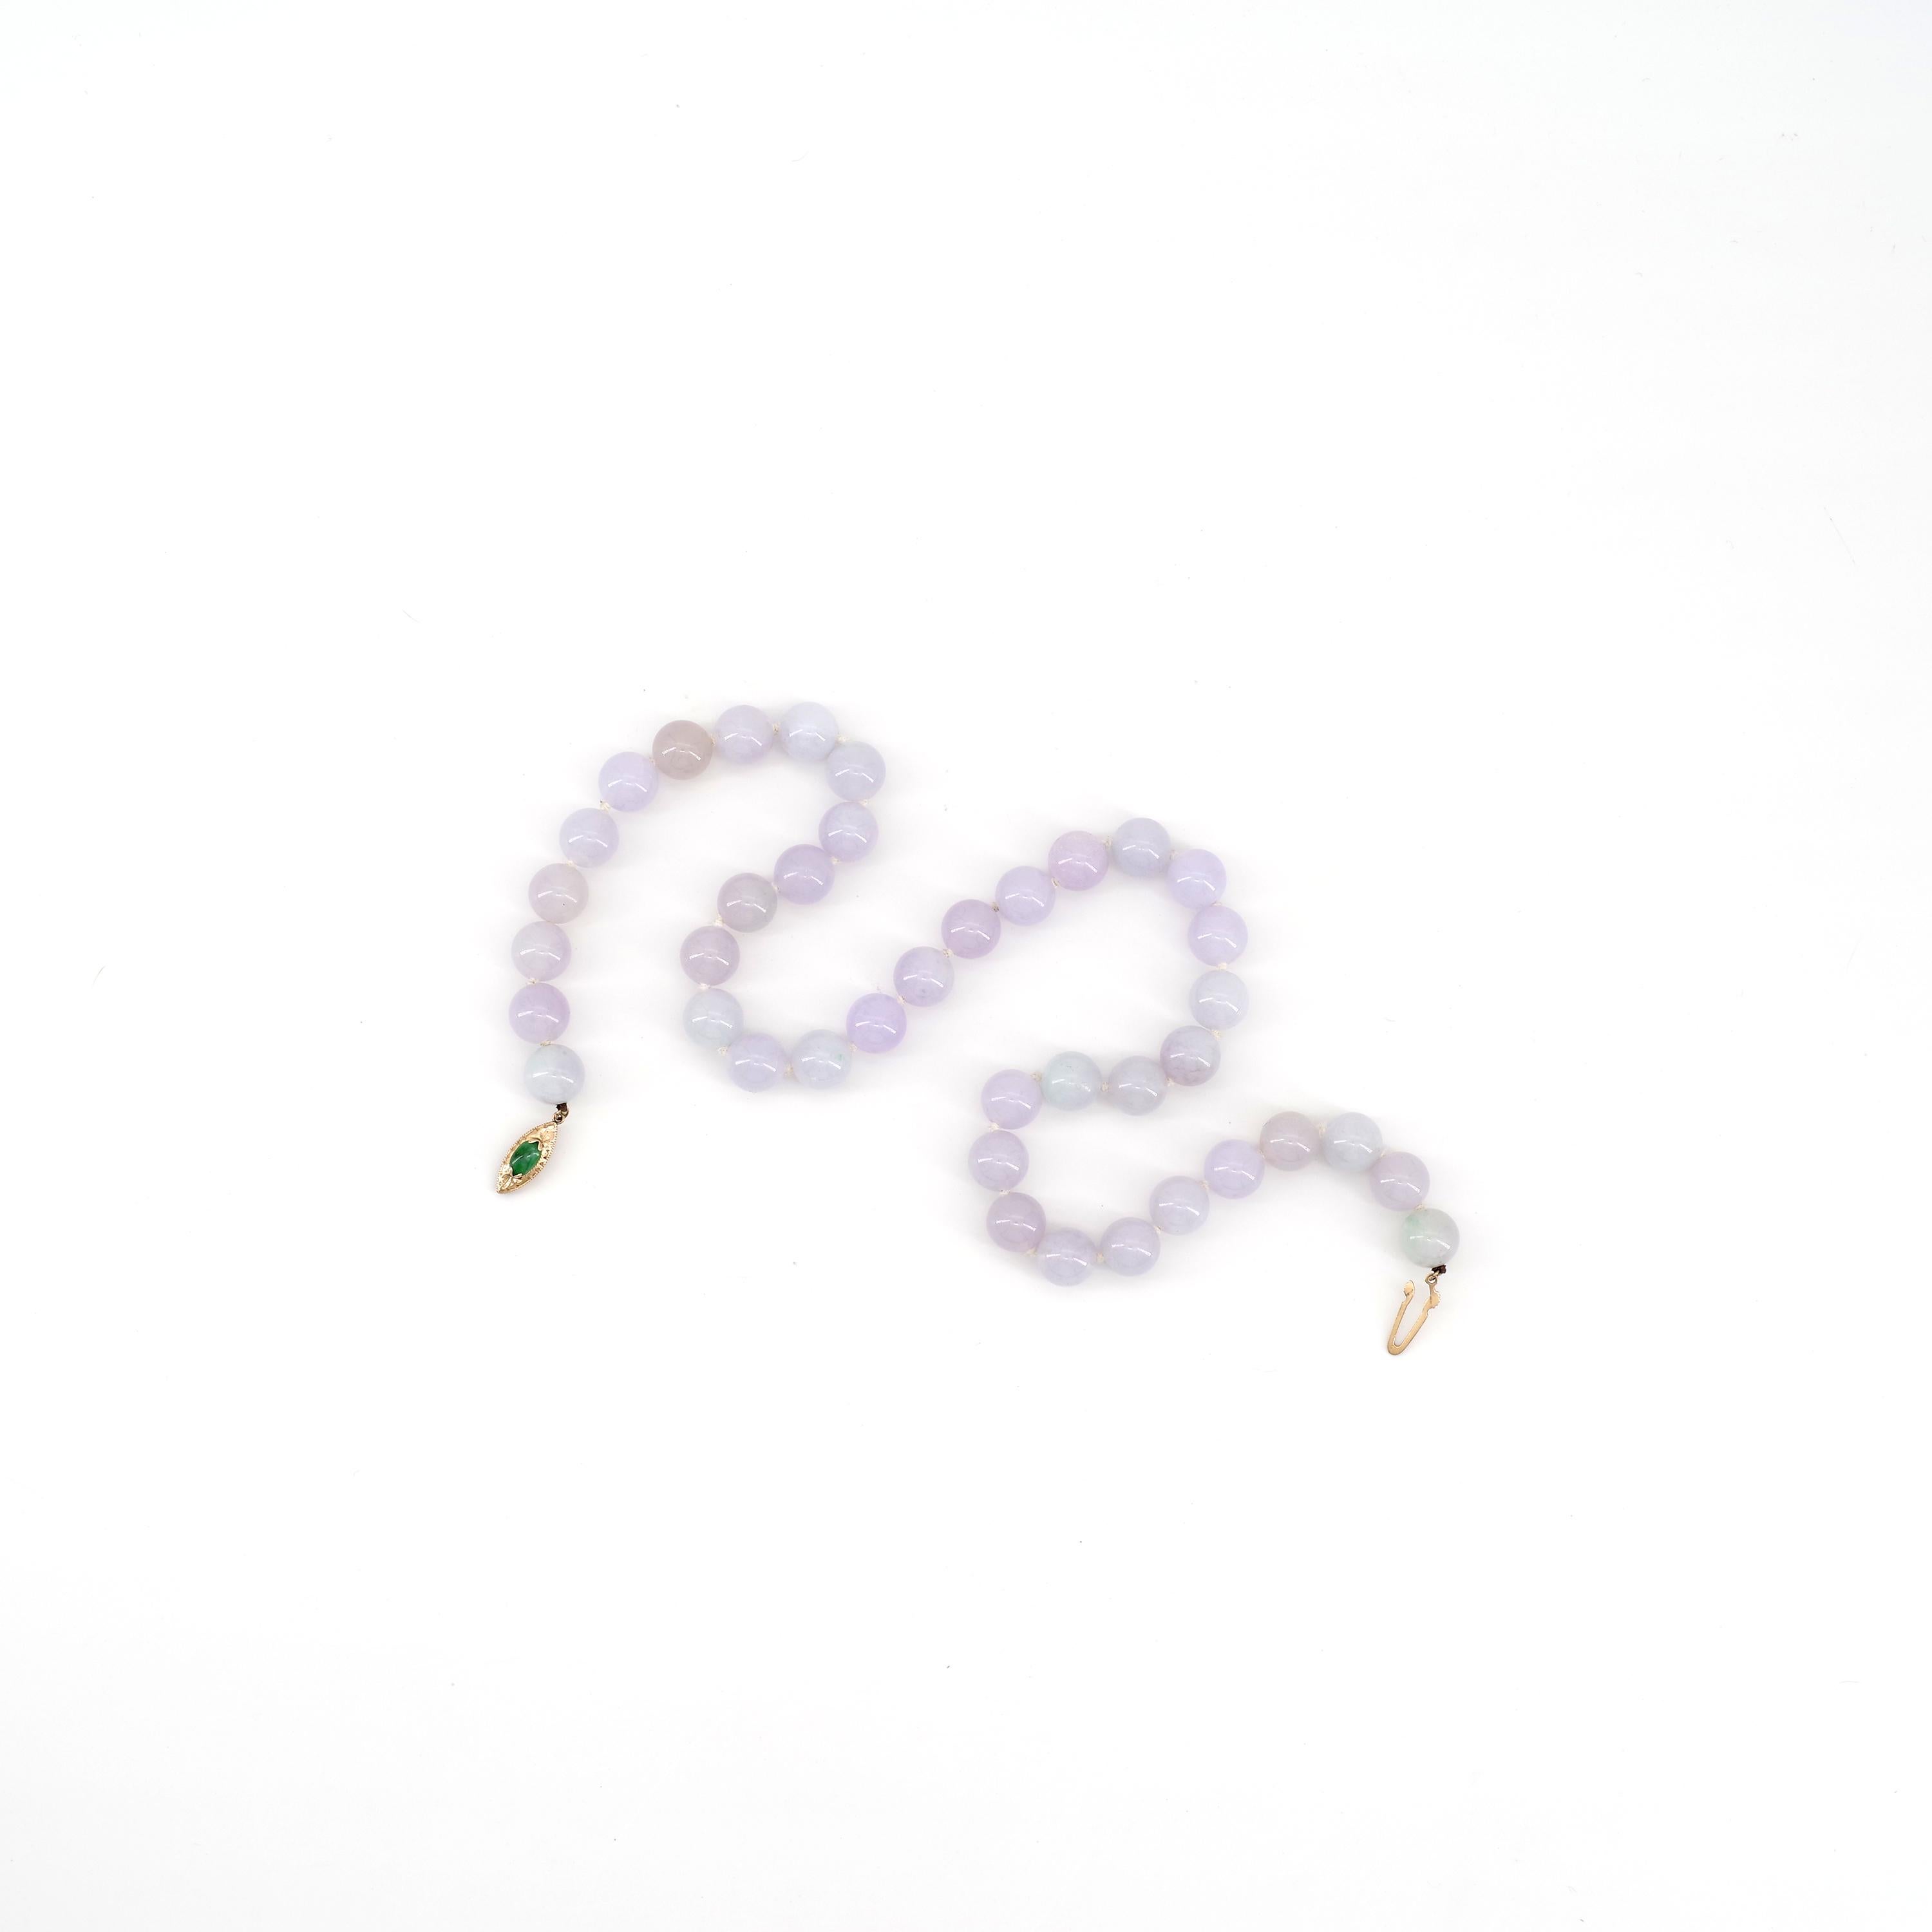 Lavender Jade Necklace from Midcentury Certified Untreated 1